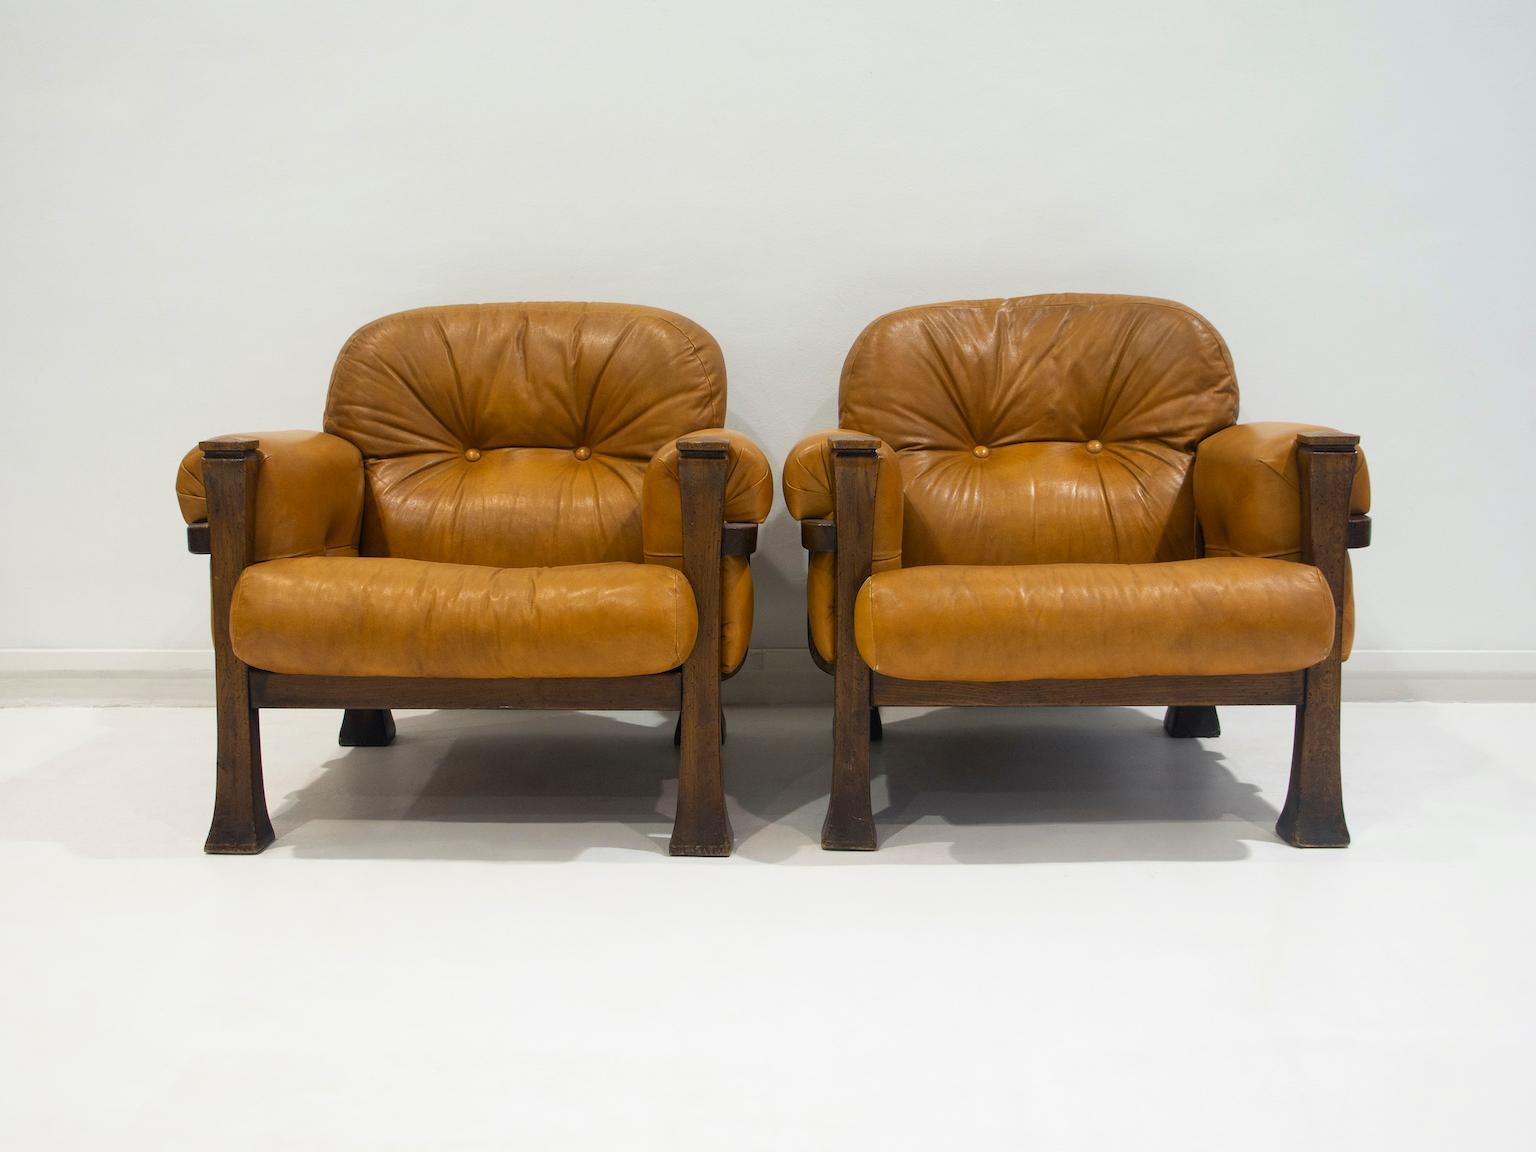 Pair of lounge chairs made in Brazil in the 1960's. The armchairs feature a solid wood frame and a caramel colored leather upholstery. The design is attributed to Percival Lafer. 